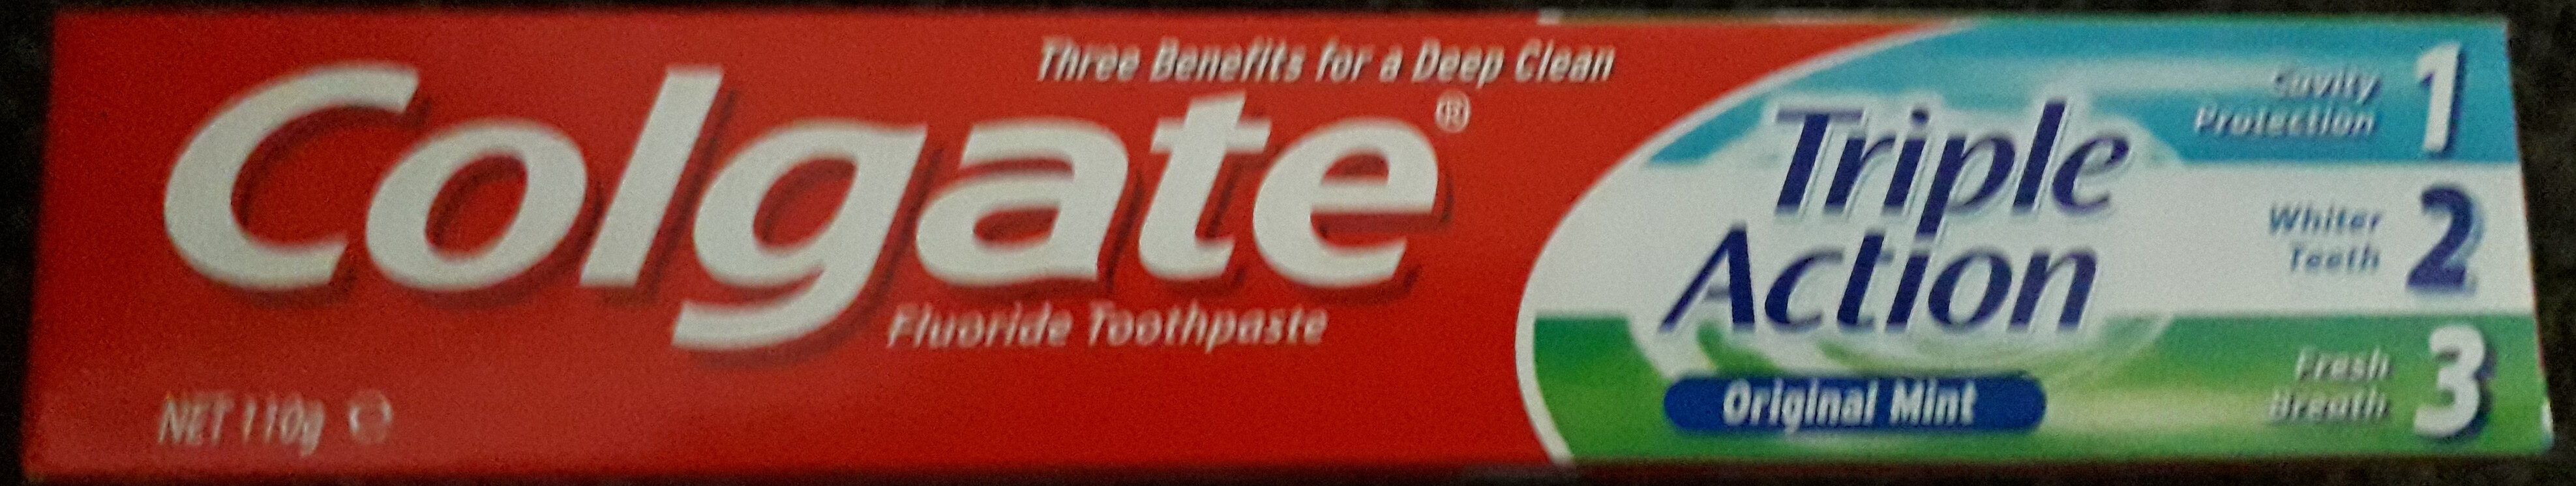 Triple Action Toothpaste - Product - en